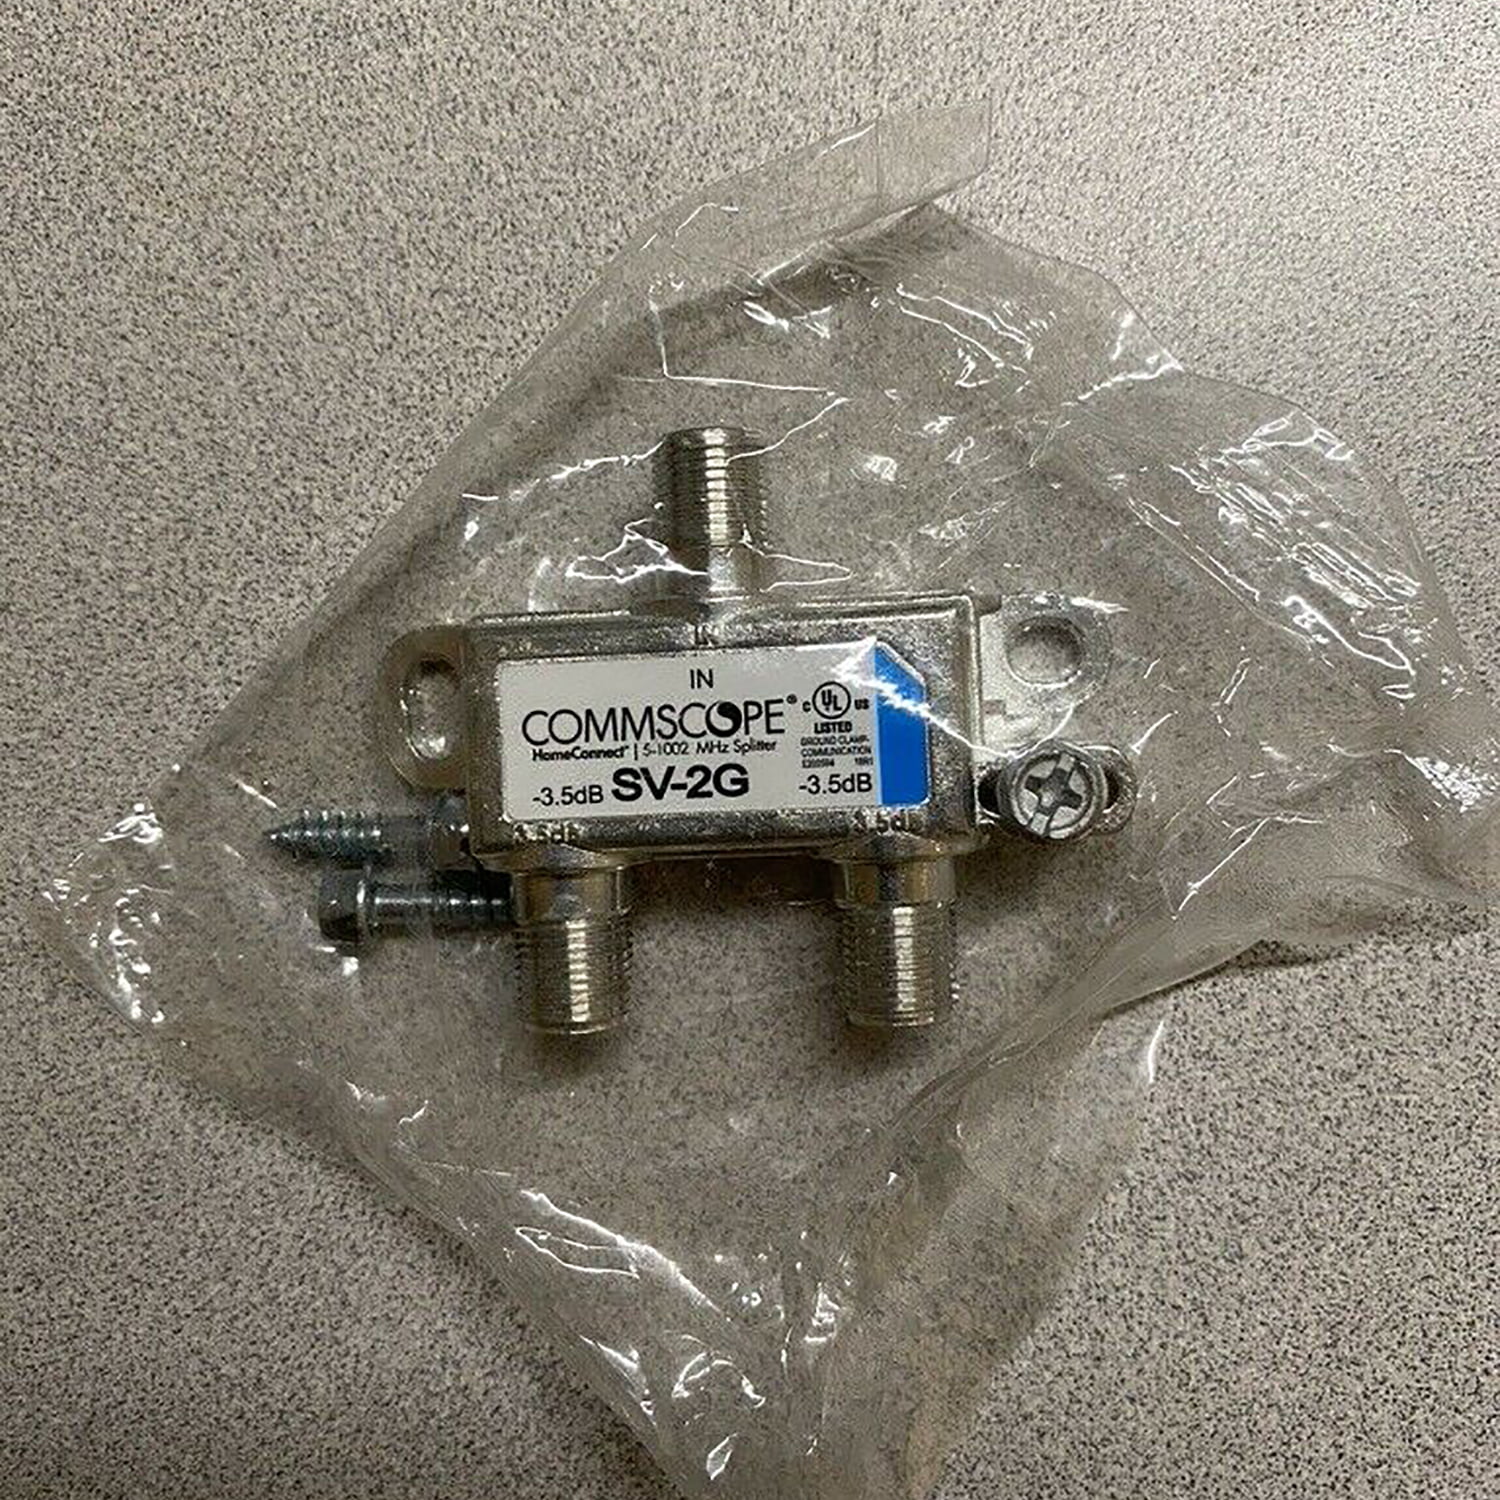 Commscope SV2G HomeConnect 2-Way Coaxial Cable Splitter 5-1002 MHz CATV 120 dB 75 ohm IndoorOutdoor 